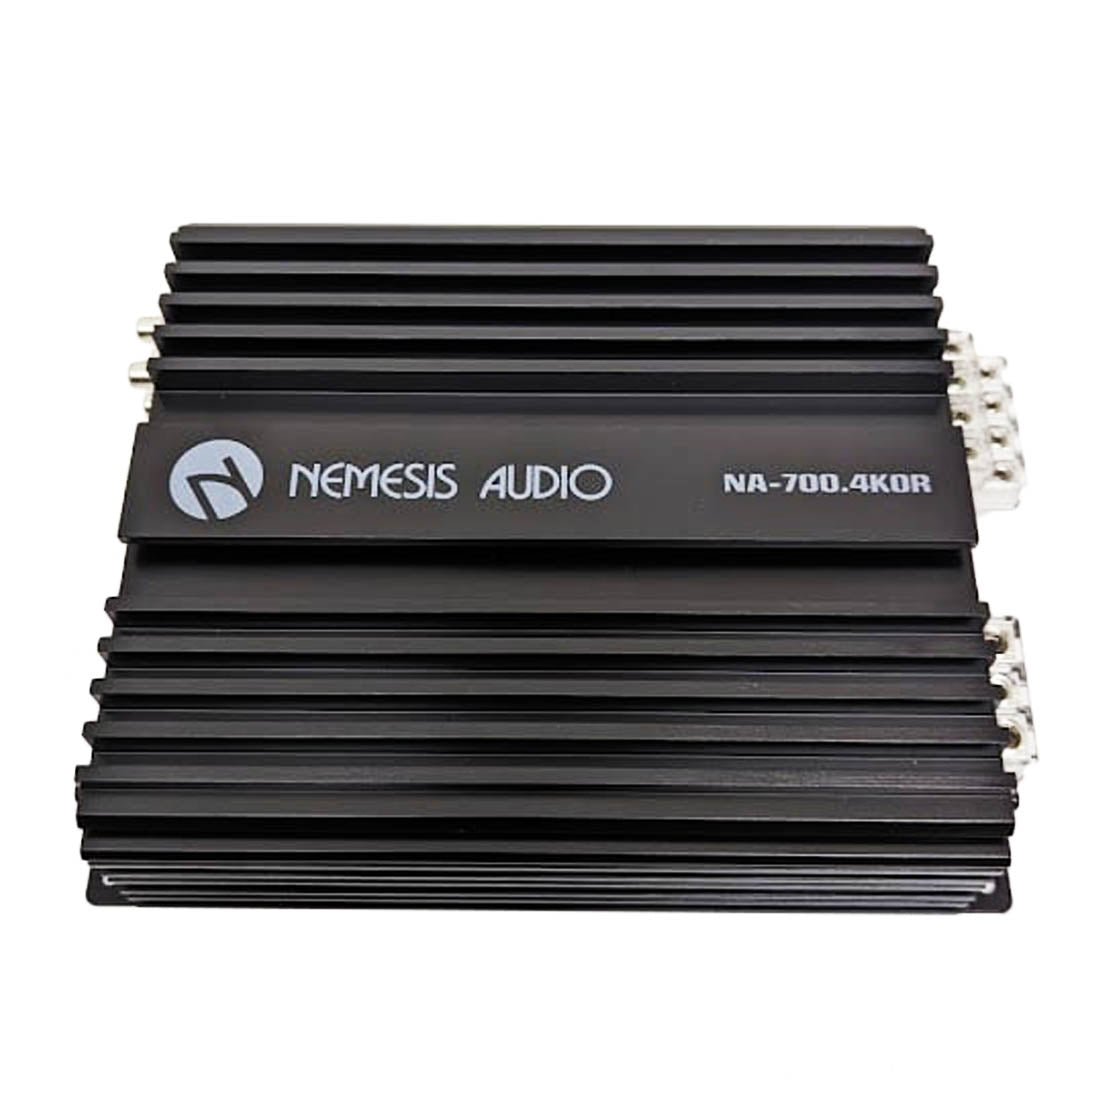 Nemesis Audio NA-700.4KOR 700W RMS 4-Channel Car Stereo Amplifier